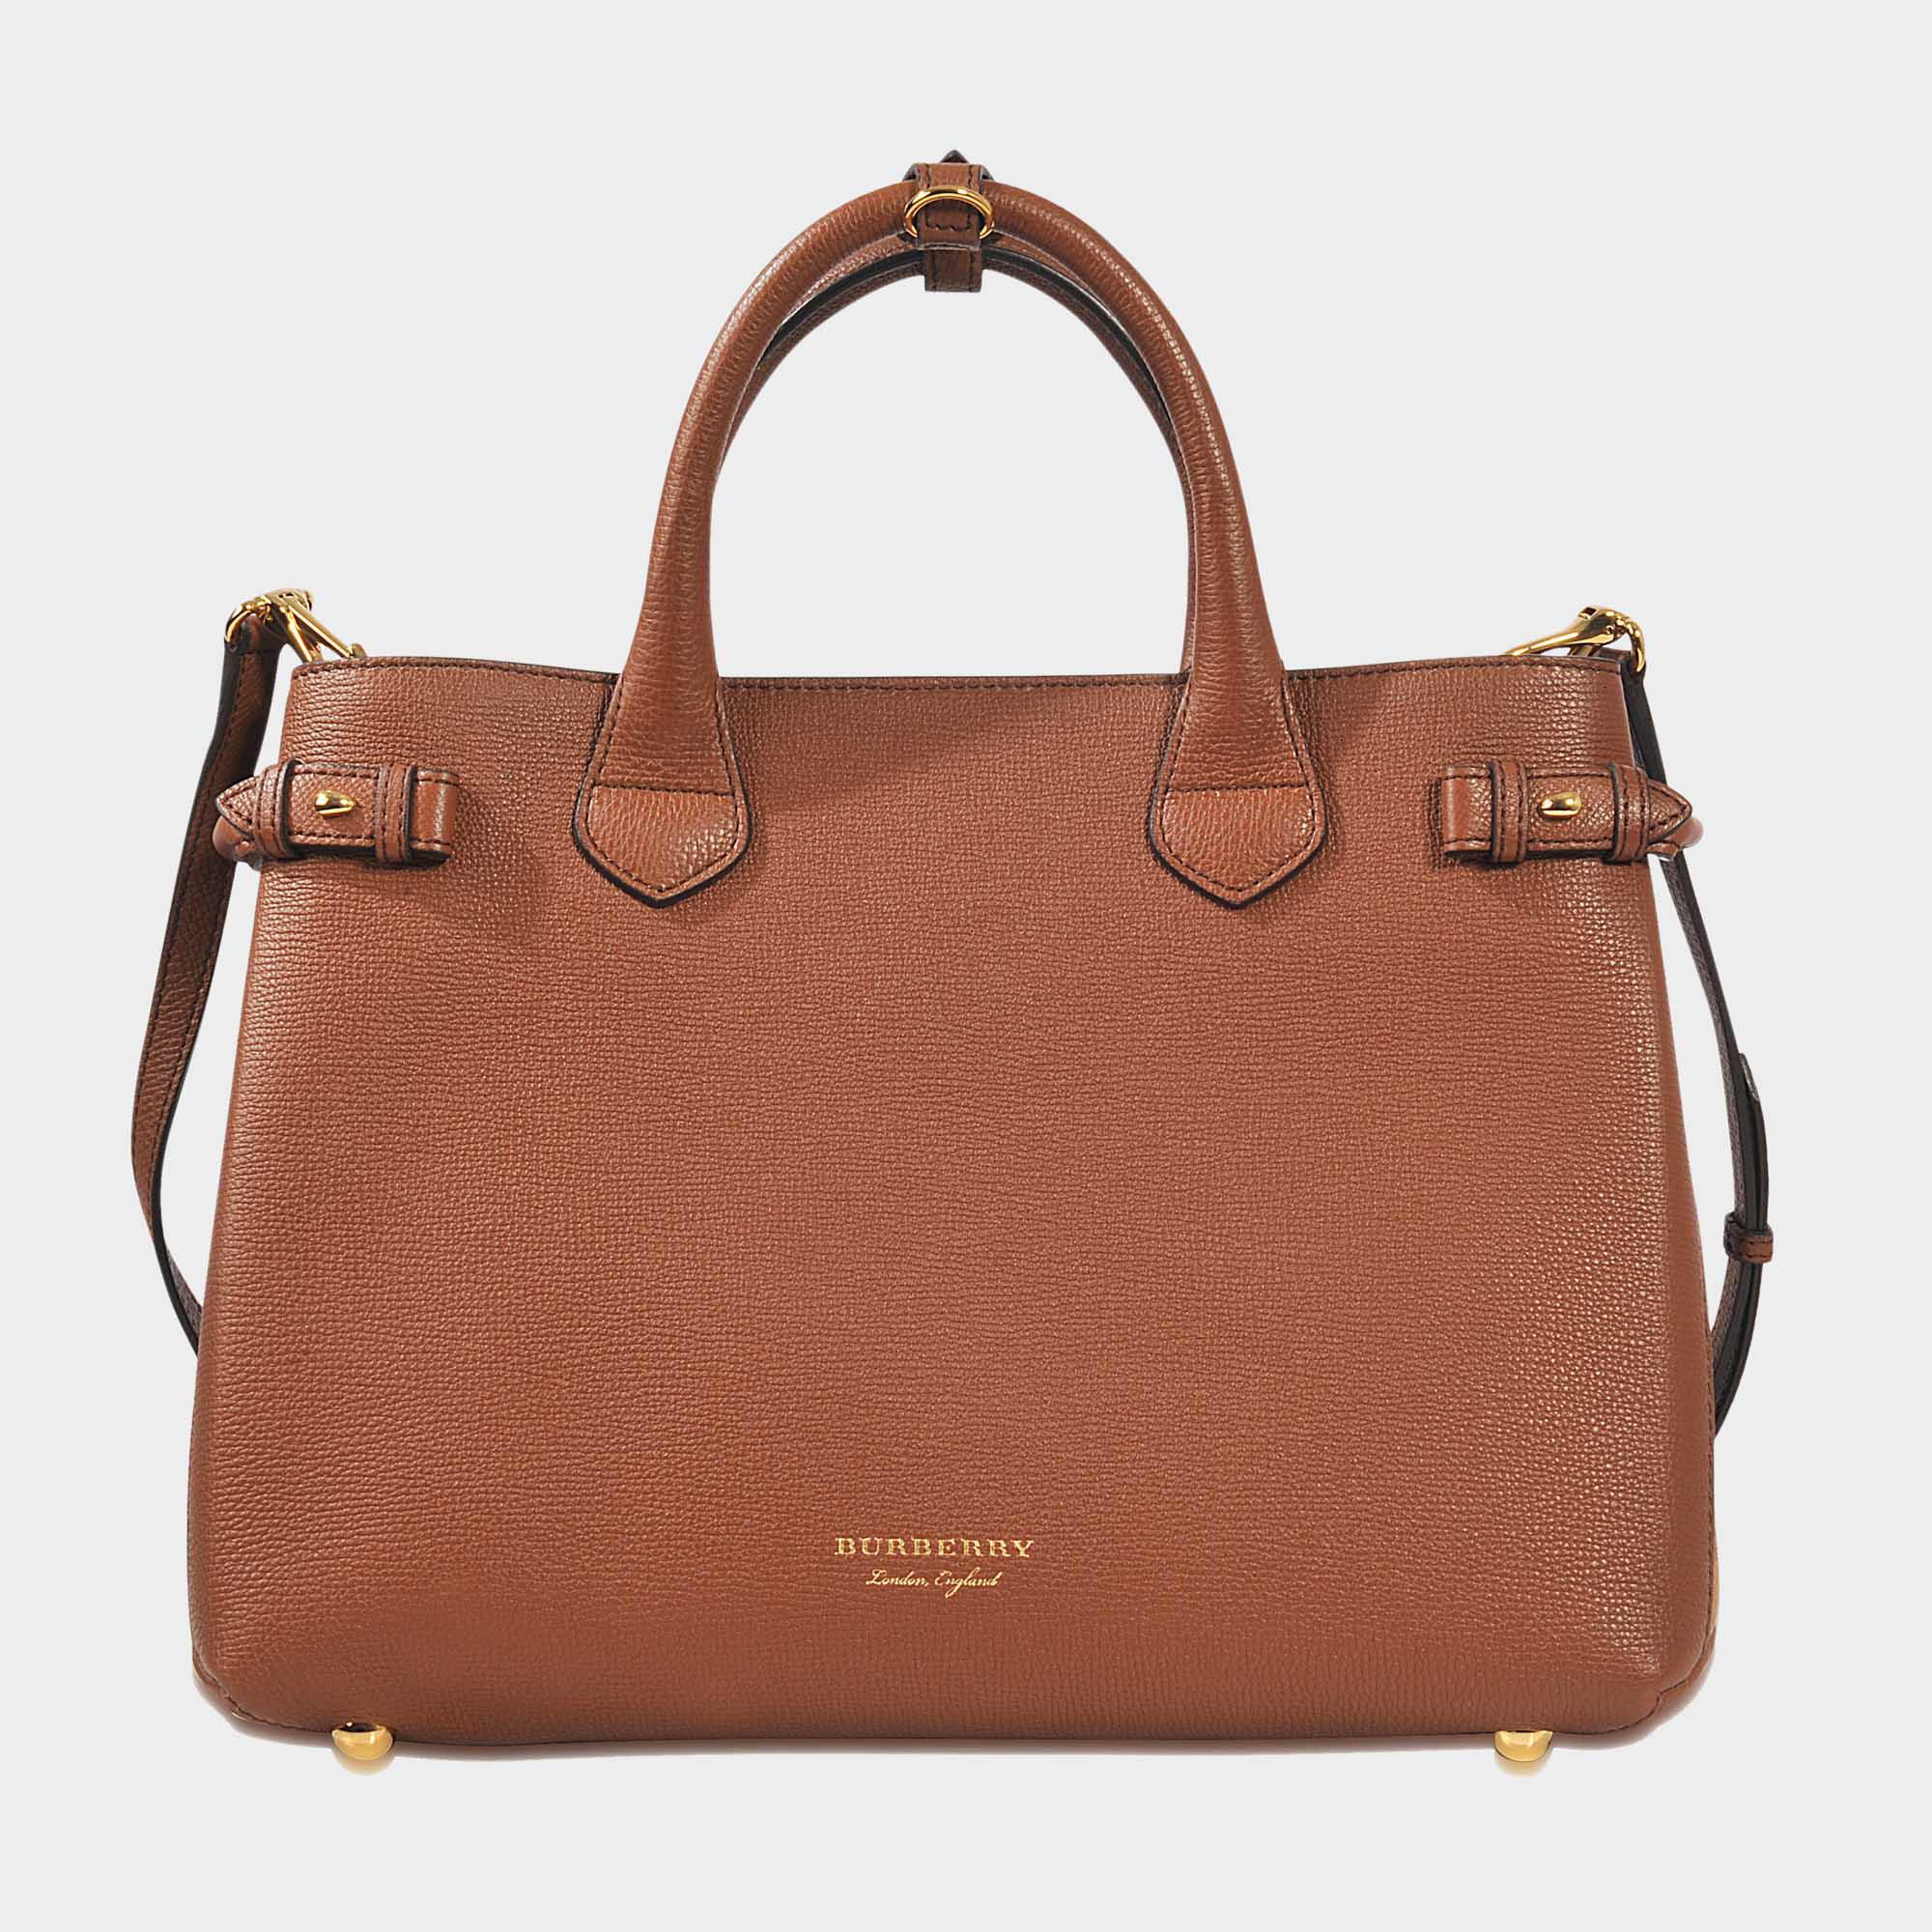 Burberry Leather Medium Banner Bag in Brown - Lyst